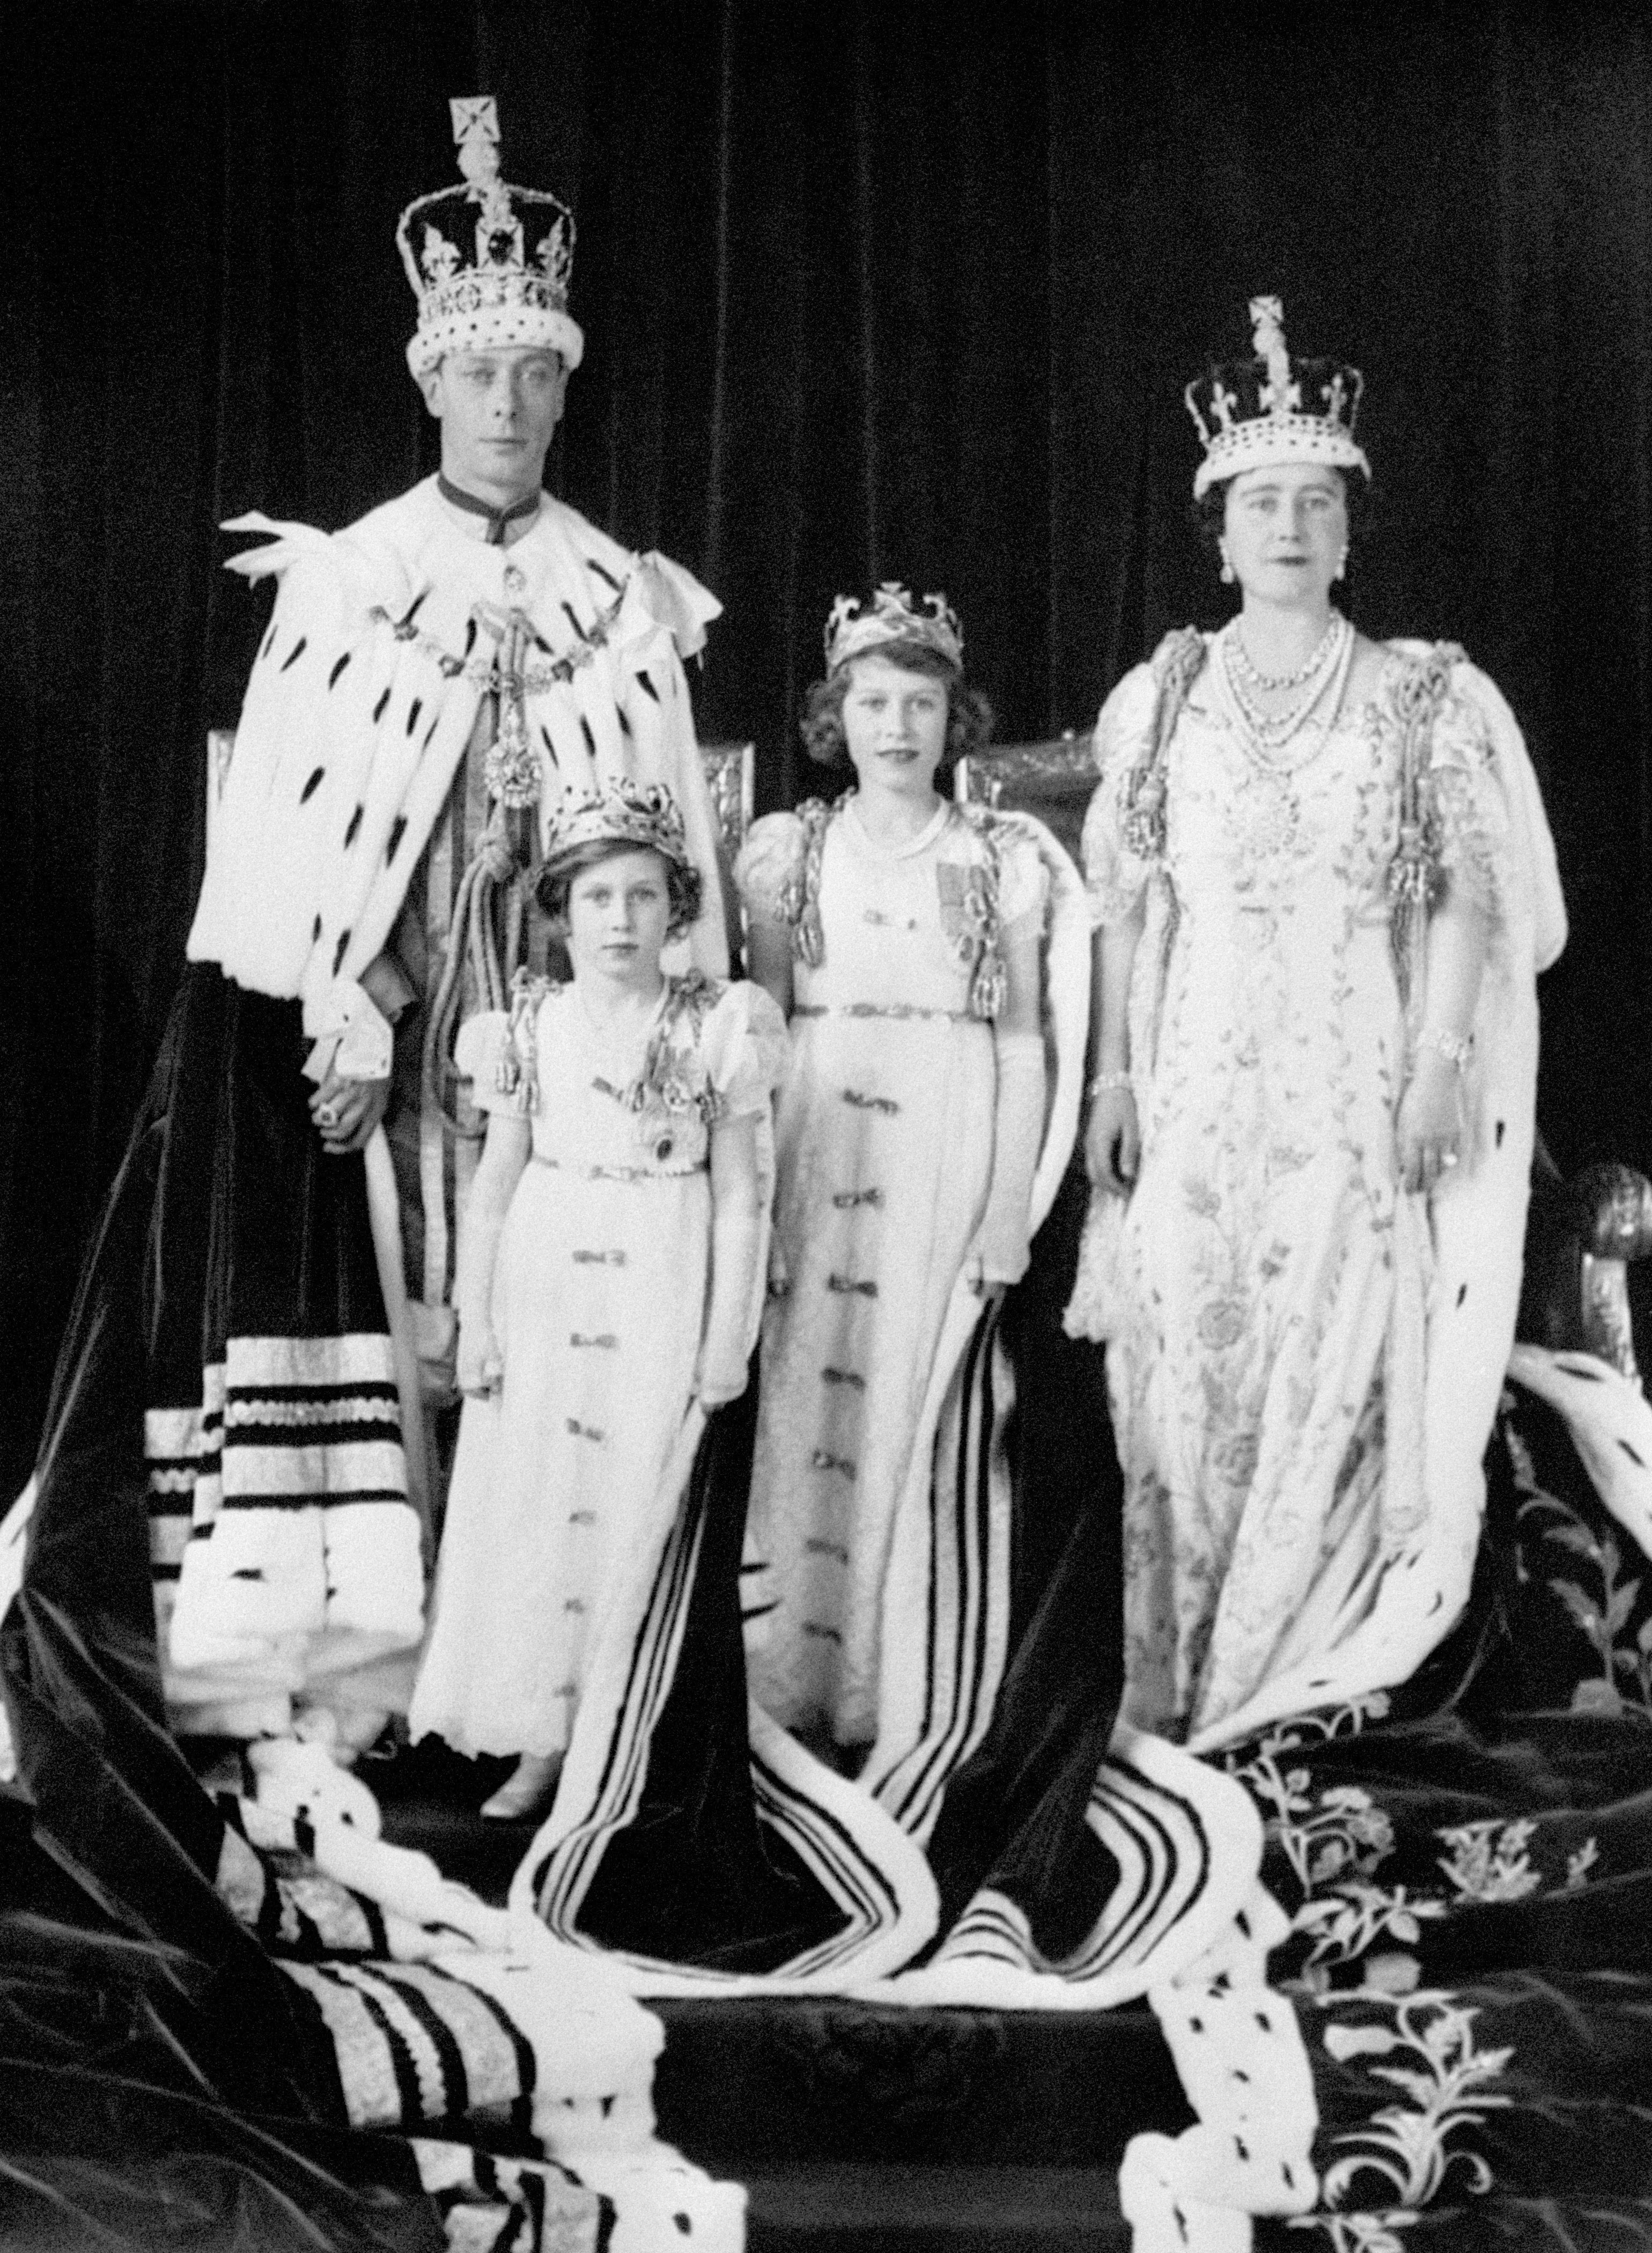 King George VI and Queen Elizabeth with their daughters Princess Elizabeth and Princess Margaret after the coronation